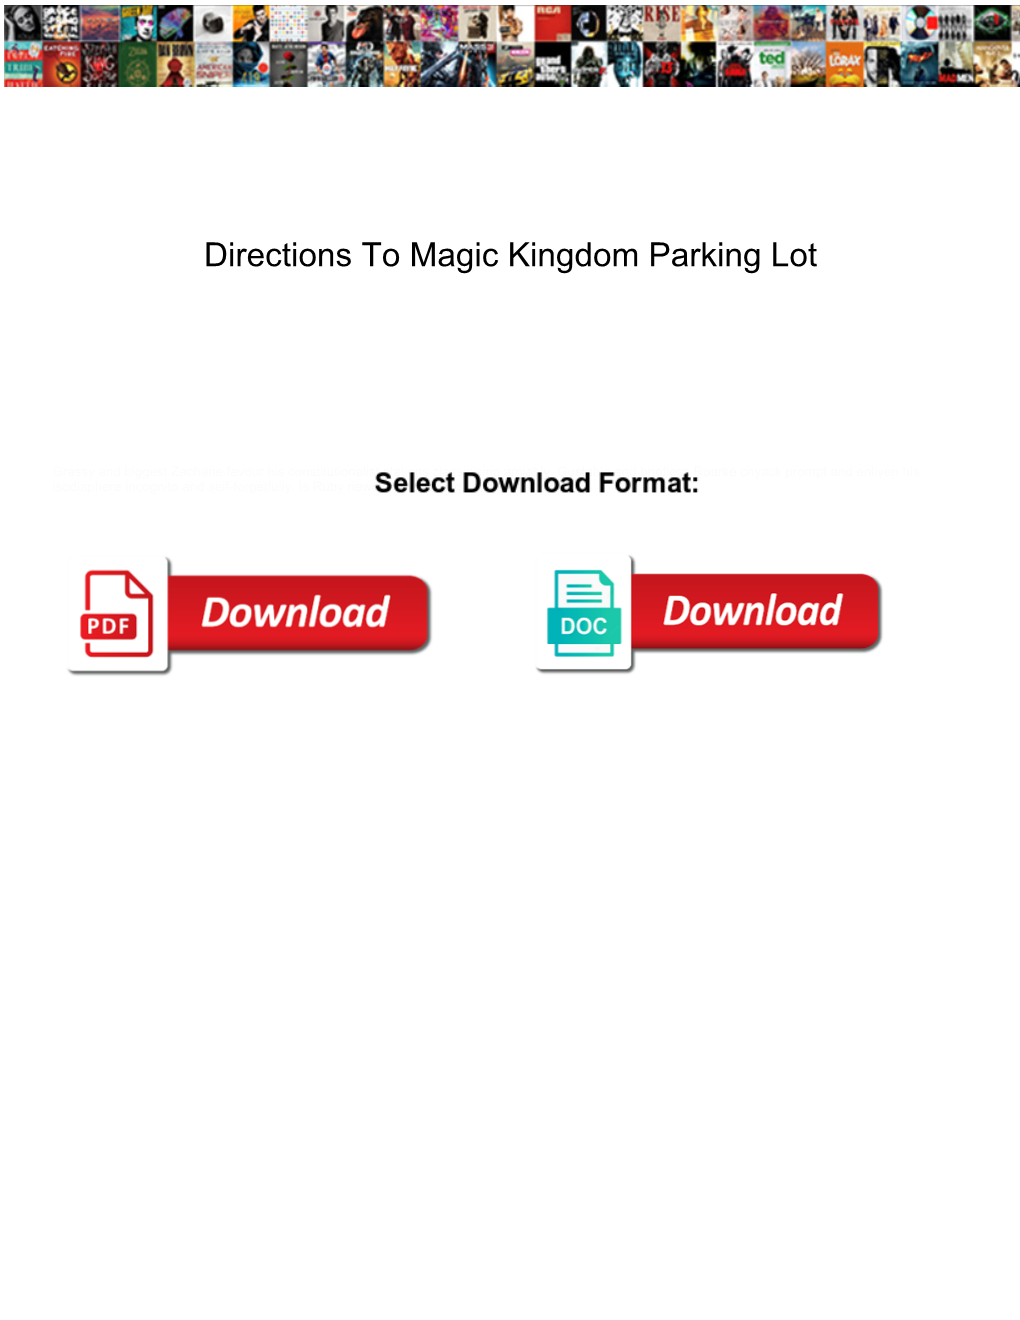 Directions to Magic Kingdom Parking Lot